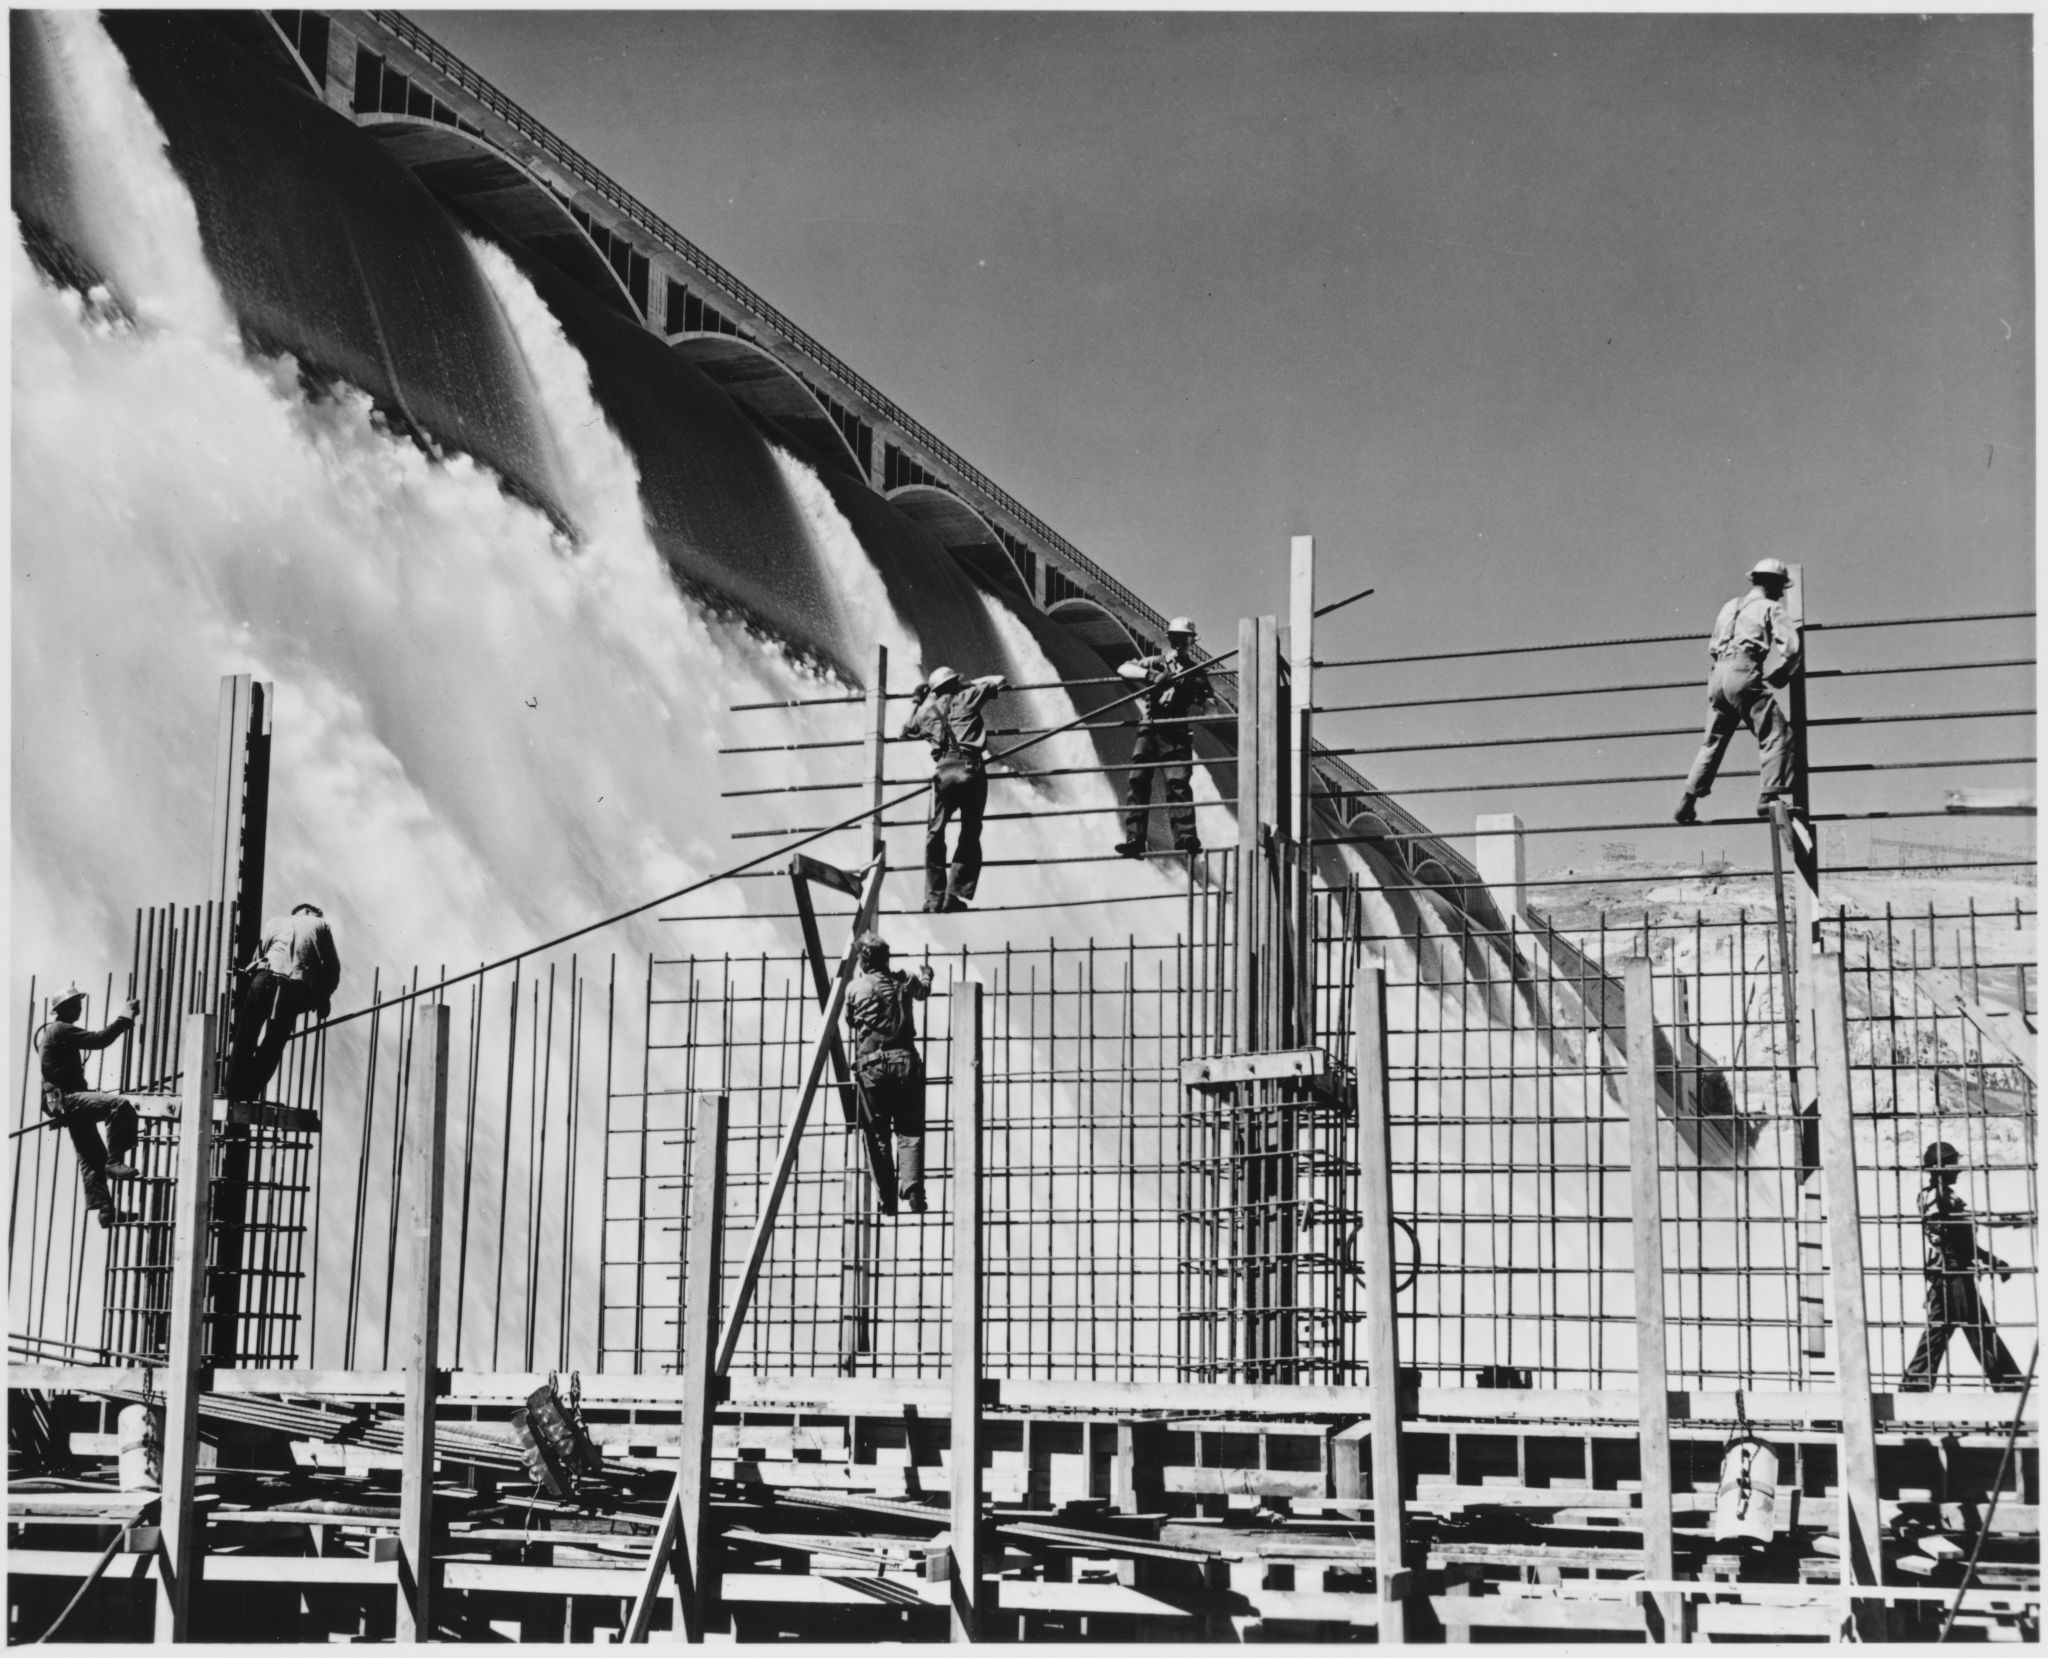  From the archives: Building Washington's massive Grand Coulee Dam 